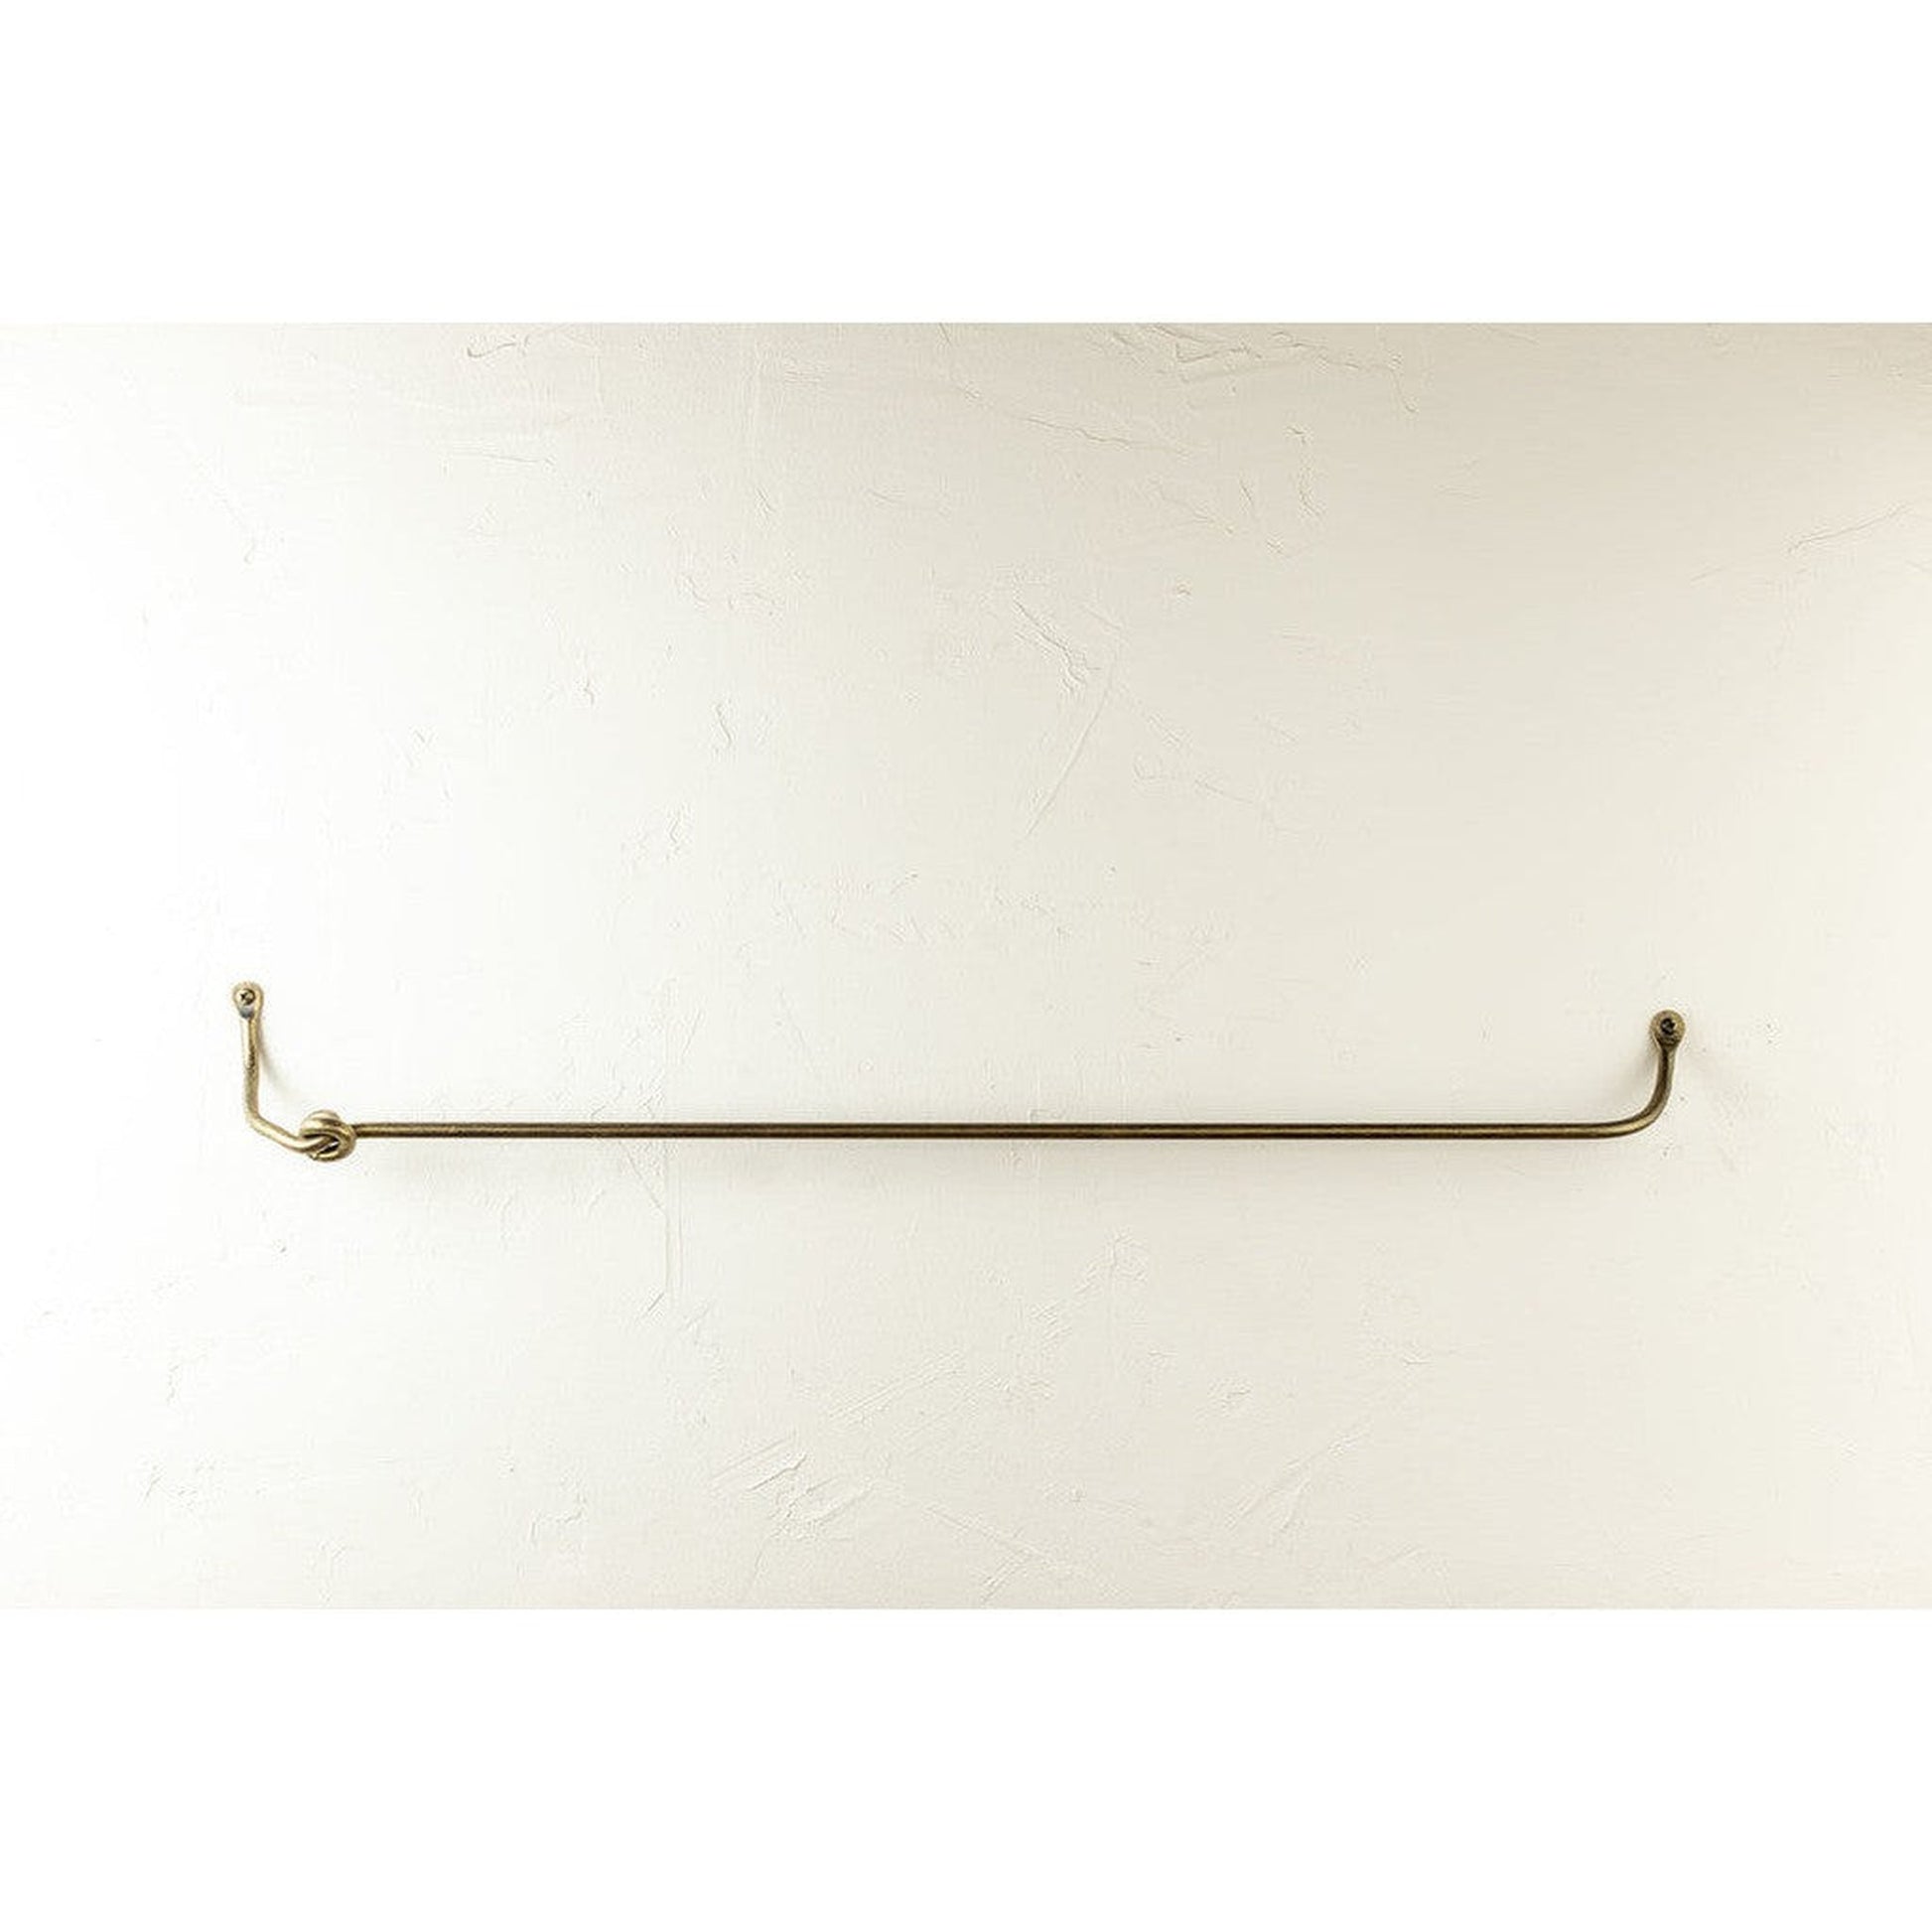 Stone County Ironworks Knot 24" Woodland Brown Iron Towel Bar